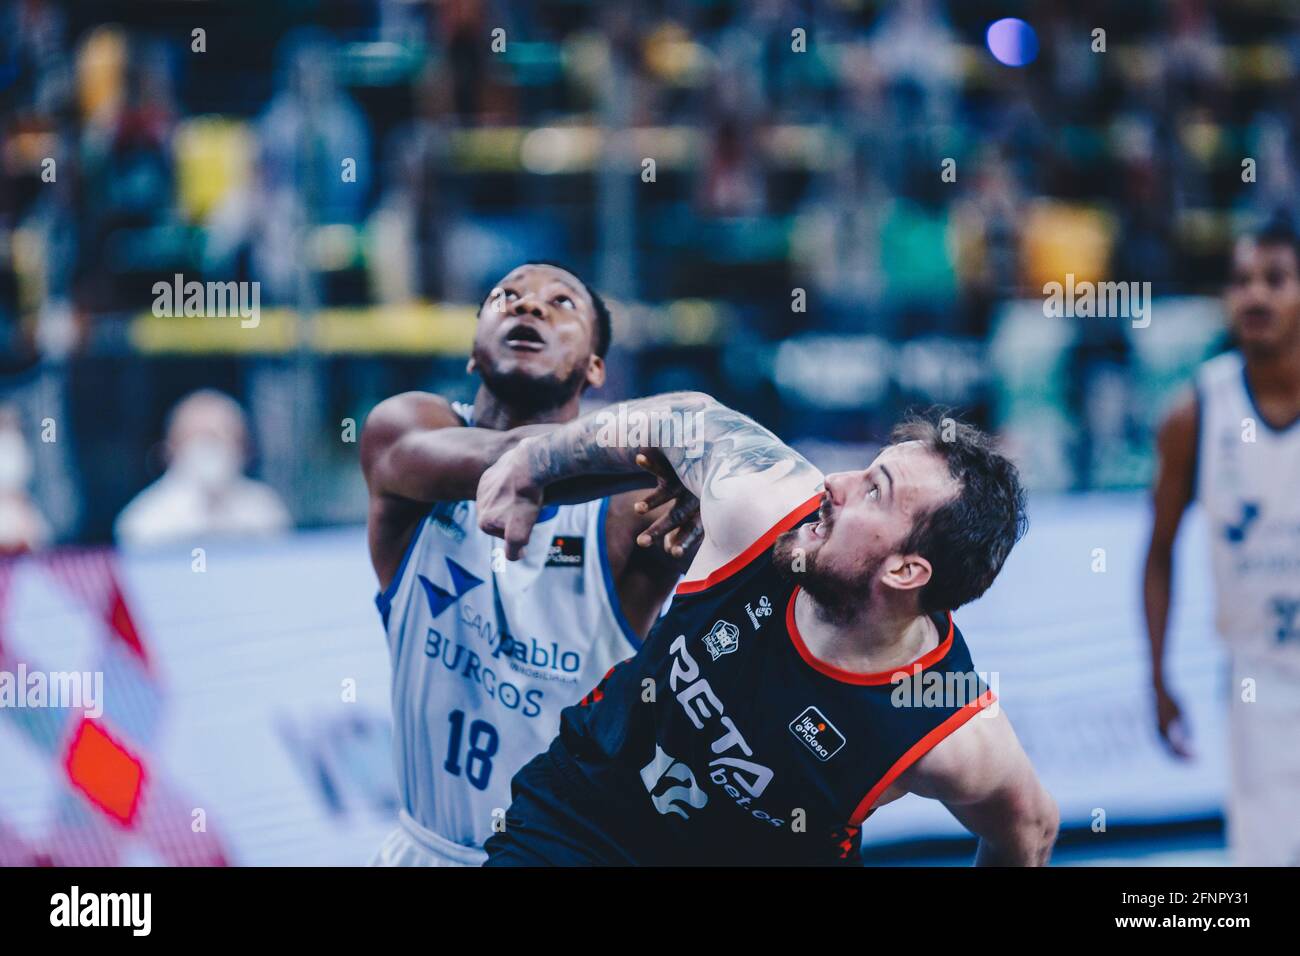 Bilbao, Basque Country, SPAIN. 18th May, 2021. ONDREJ BALVIN (12) from  Bilbao Basket and JORDAN SAKHO (18) from Burgos waiting for the rebound  during the Liga ACB game between Bilbao Basket and